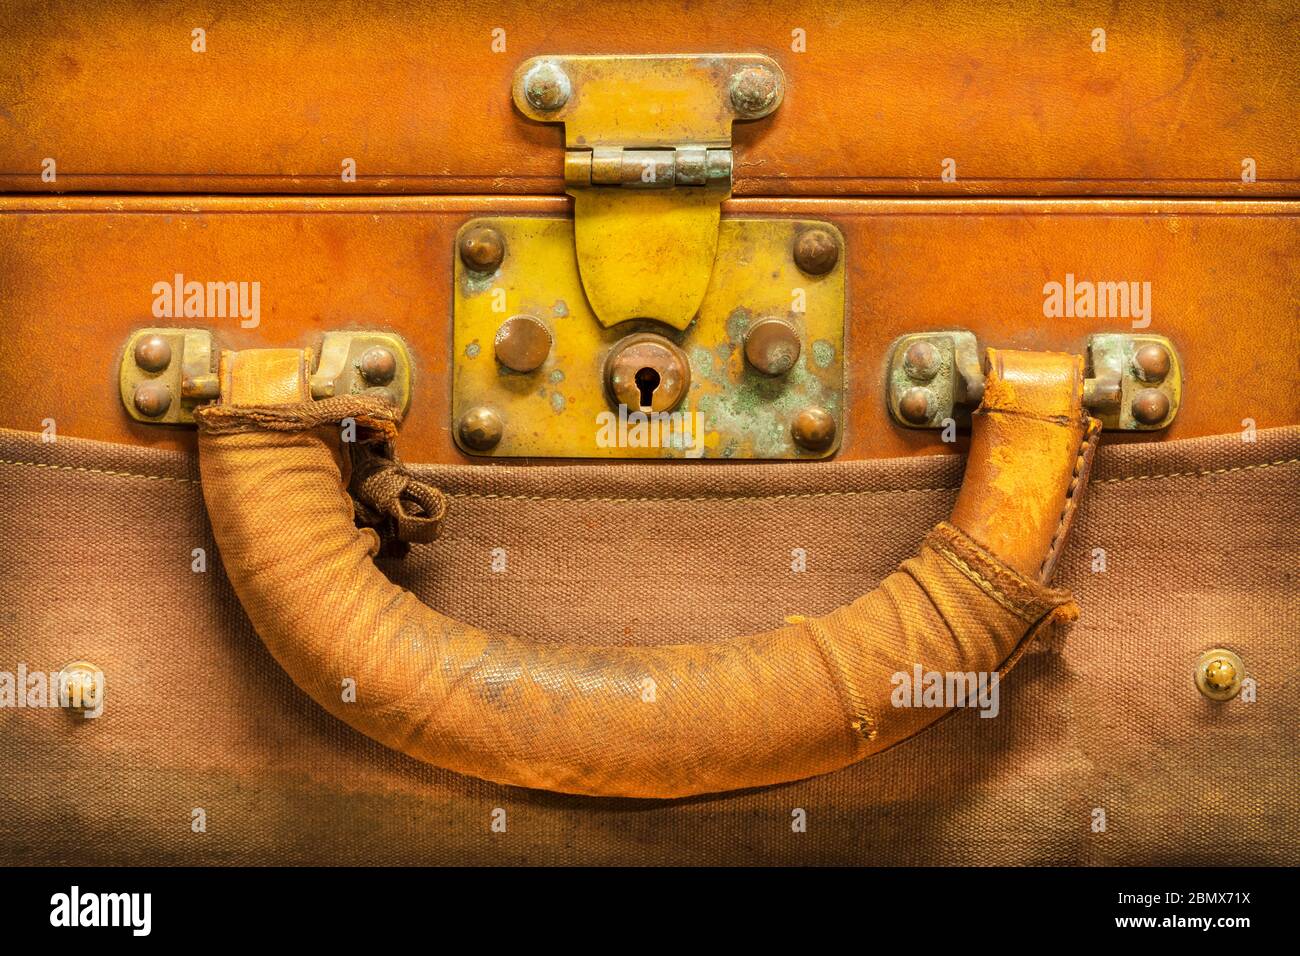 Close up of a vintage weathered brown leather suitcase with lock and handle Stock Photo